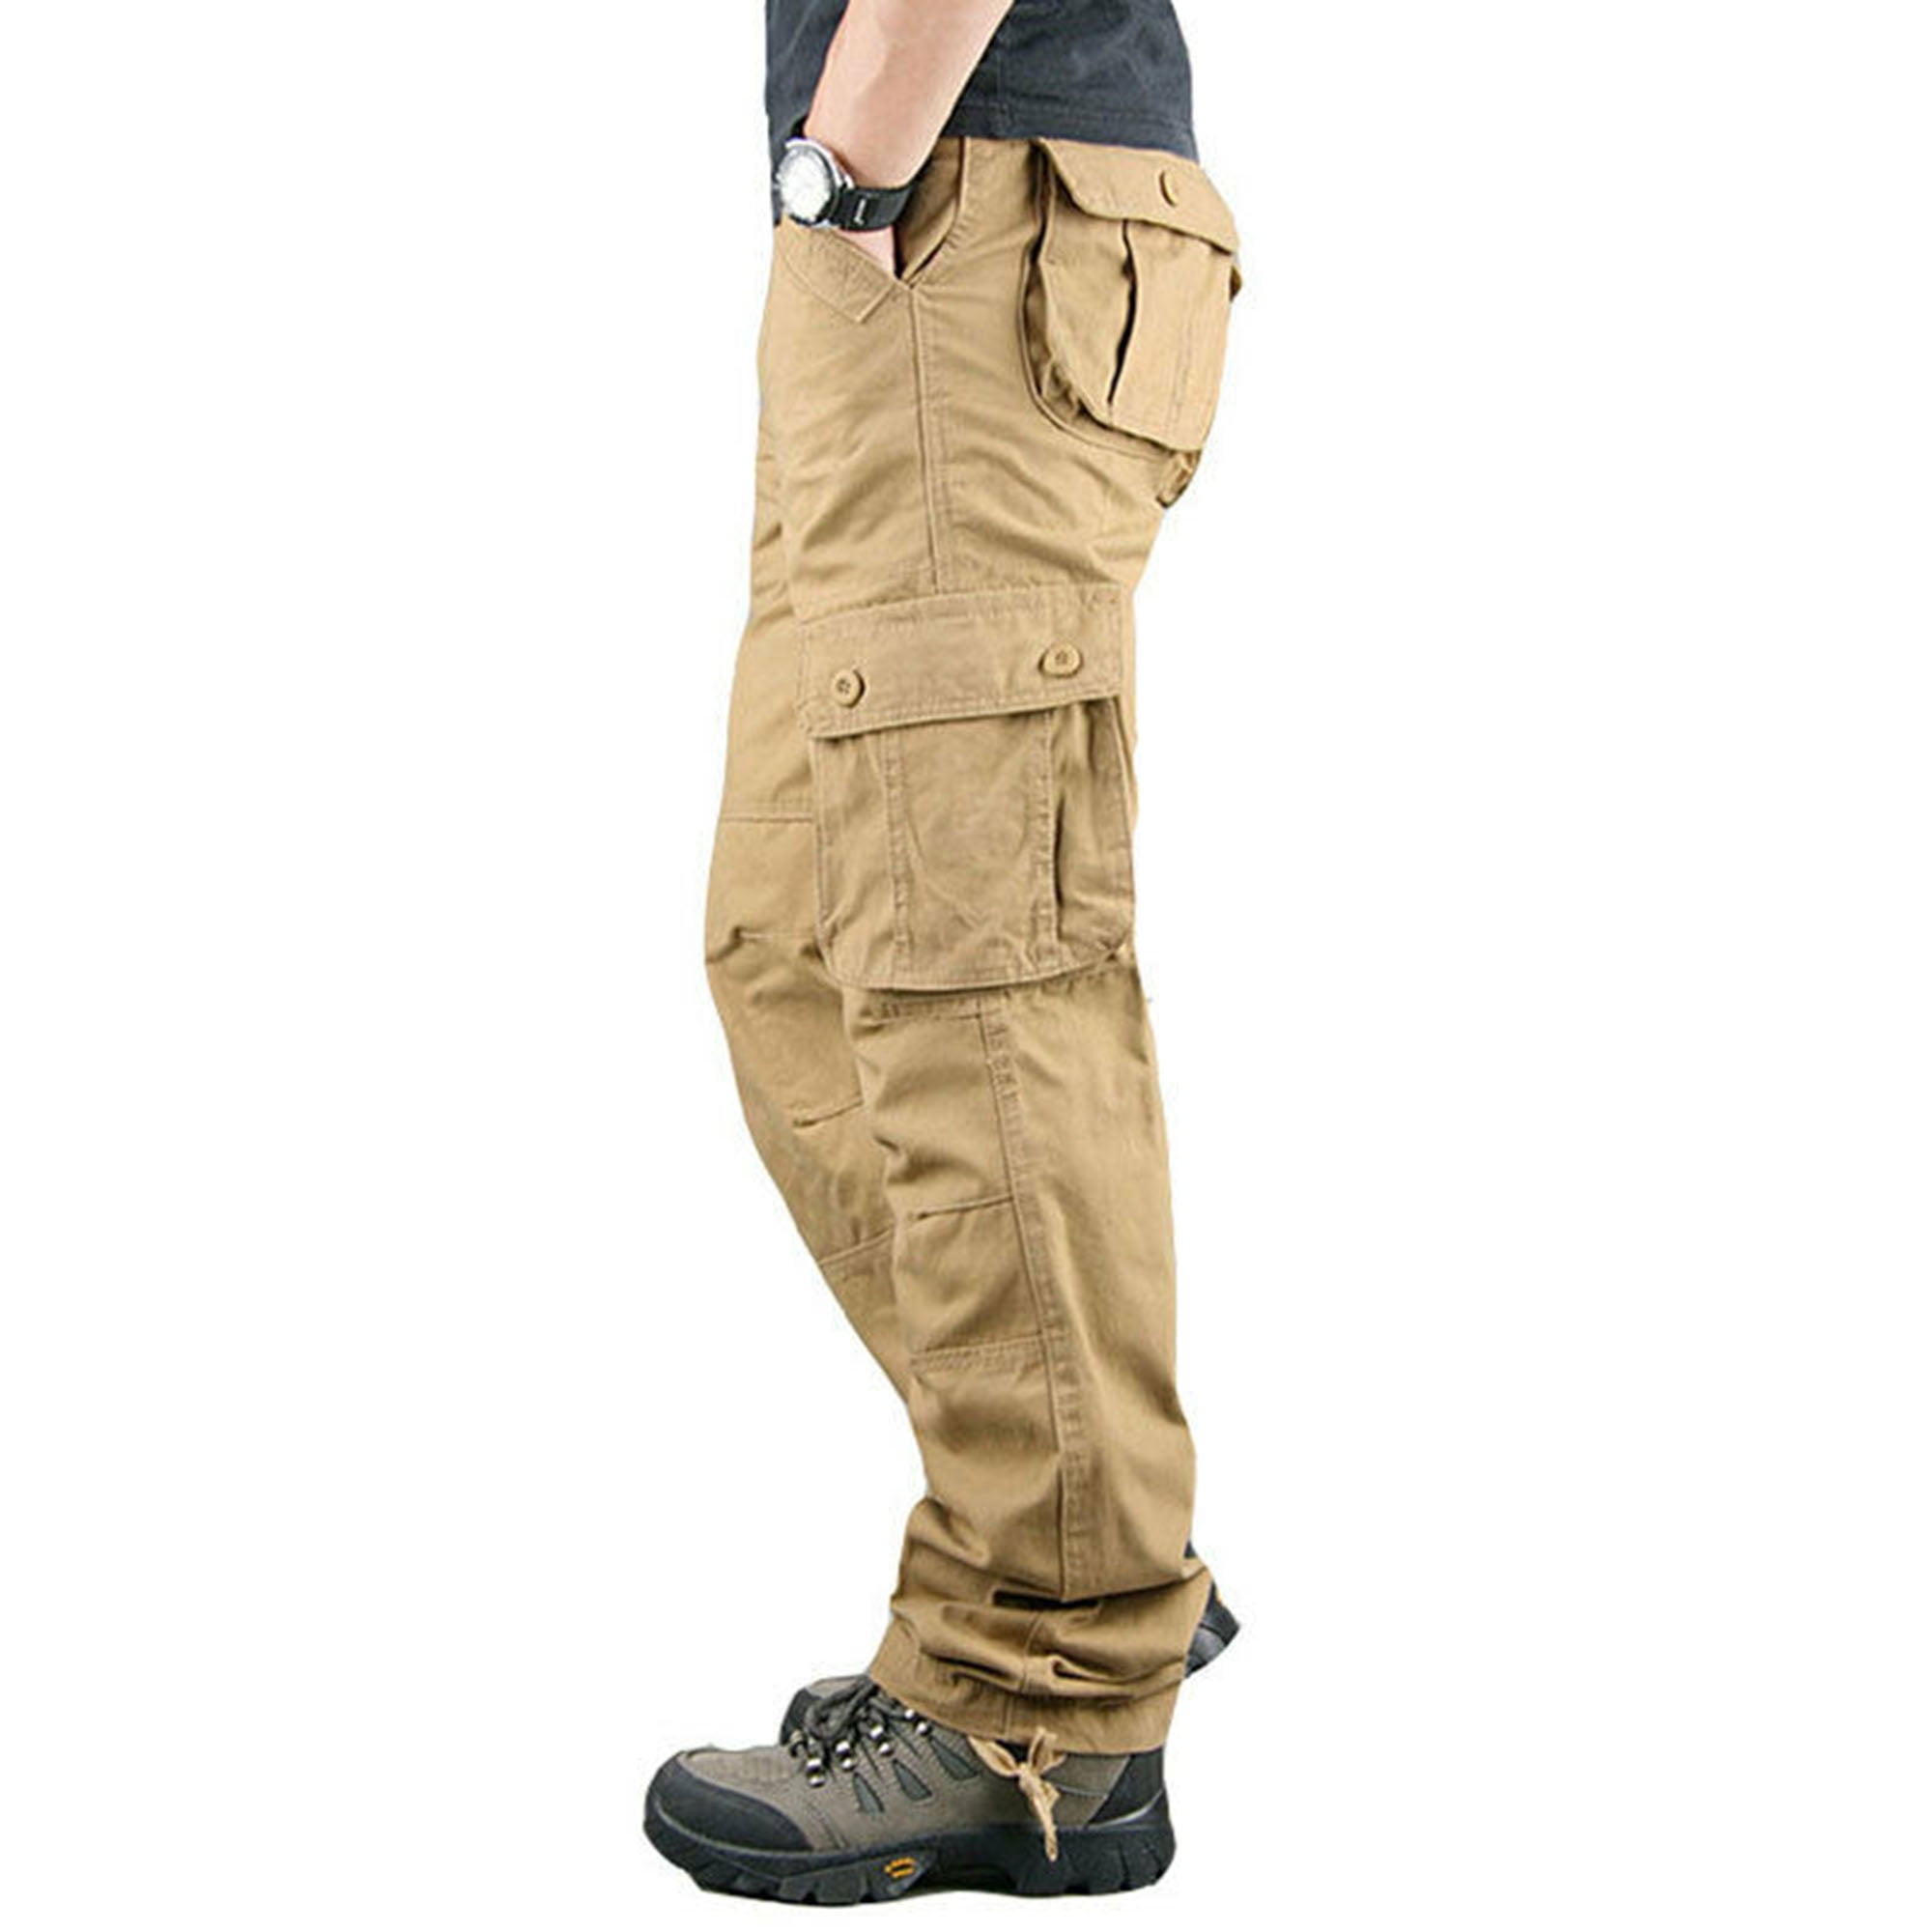 YouLoveIt Men's Casual Military Pants Camo Cargo Work Pants Trousers  Multi-Pocket Pants Casual Military Army Hiking Tactical Work Pants,6/8  pockets 